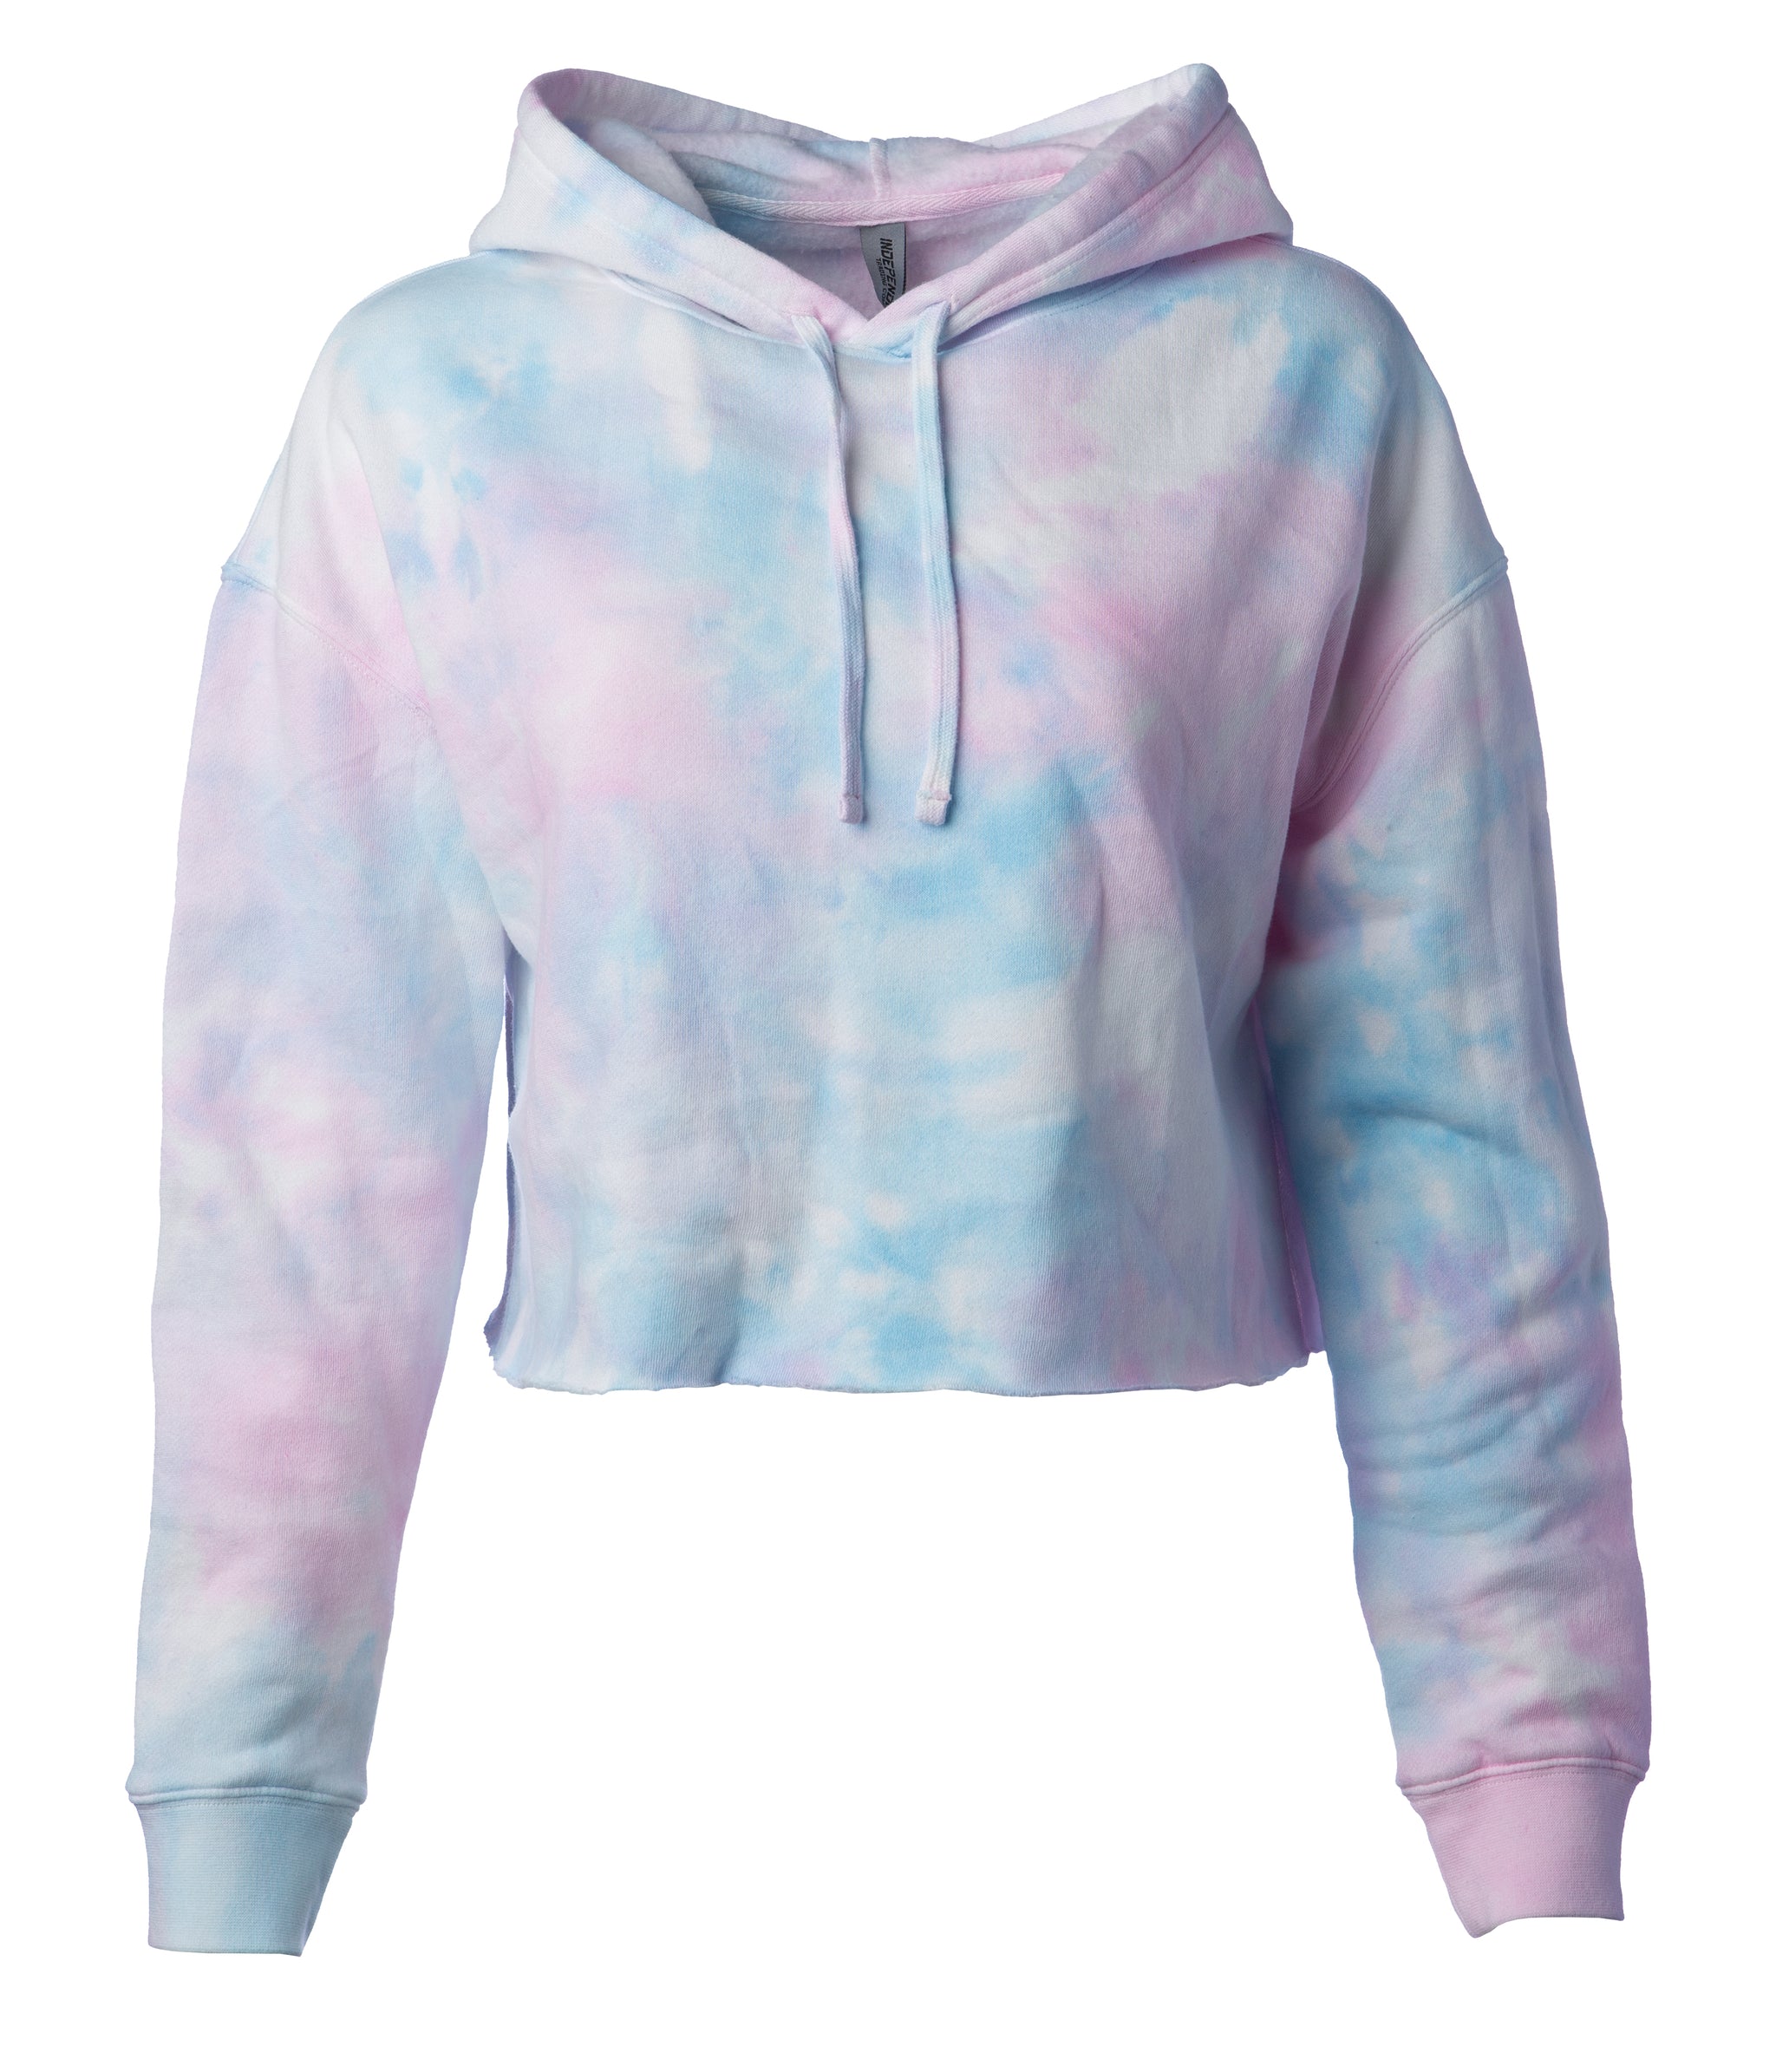 Independent Trading Co. PRM1500TD Youth Midweight Tie Dye Hooded Pullover - Tie Dye Pink, XL